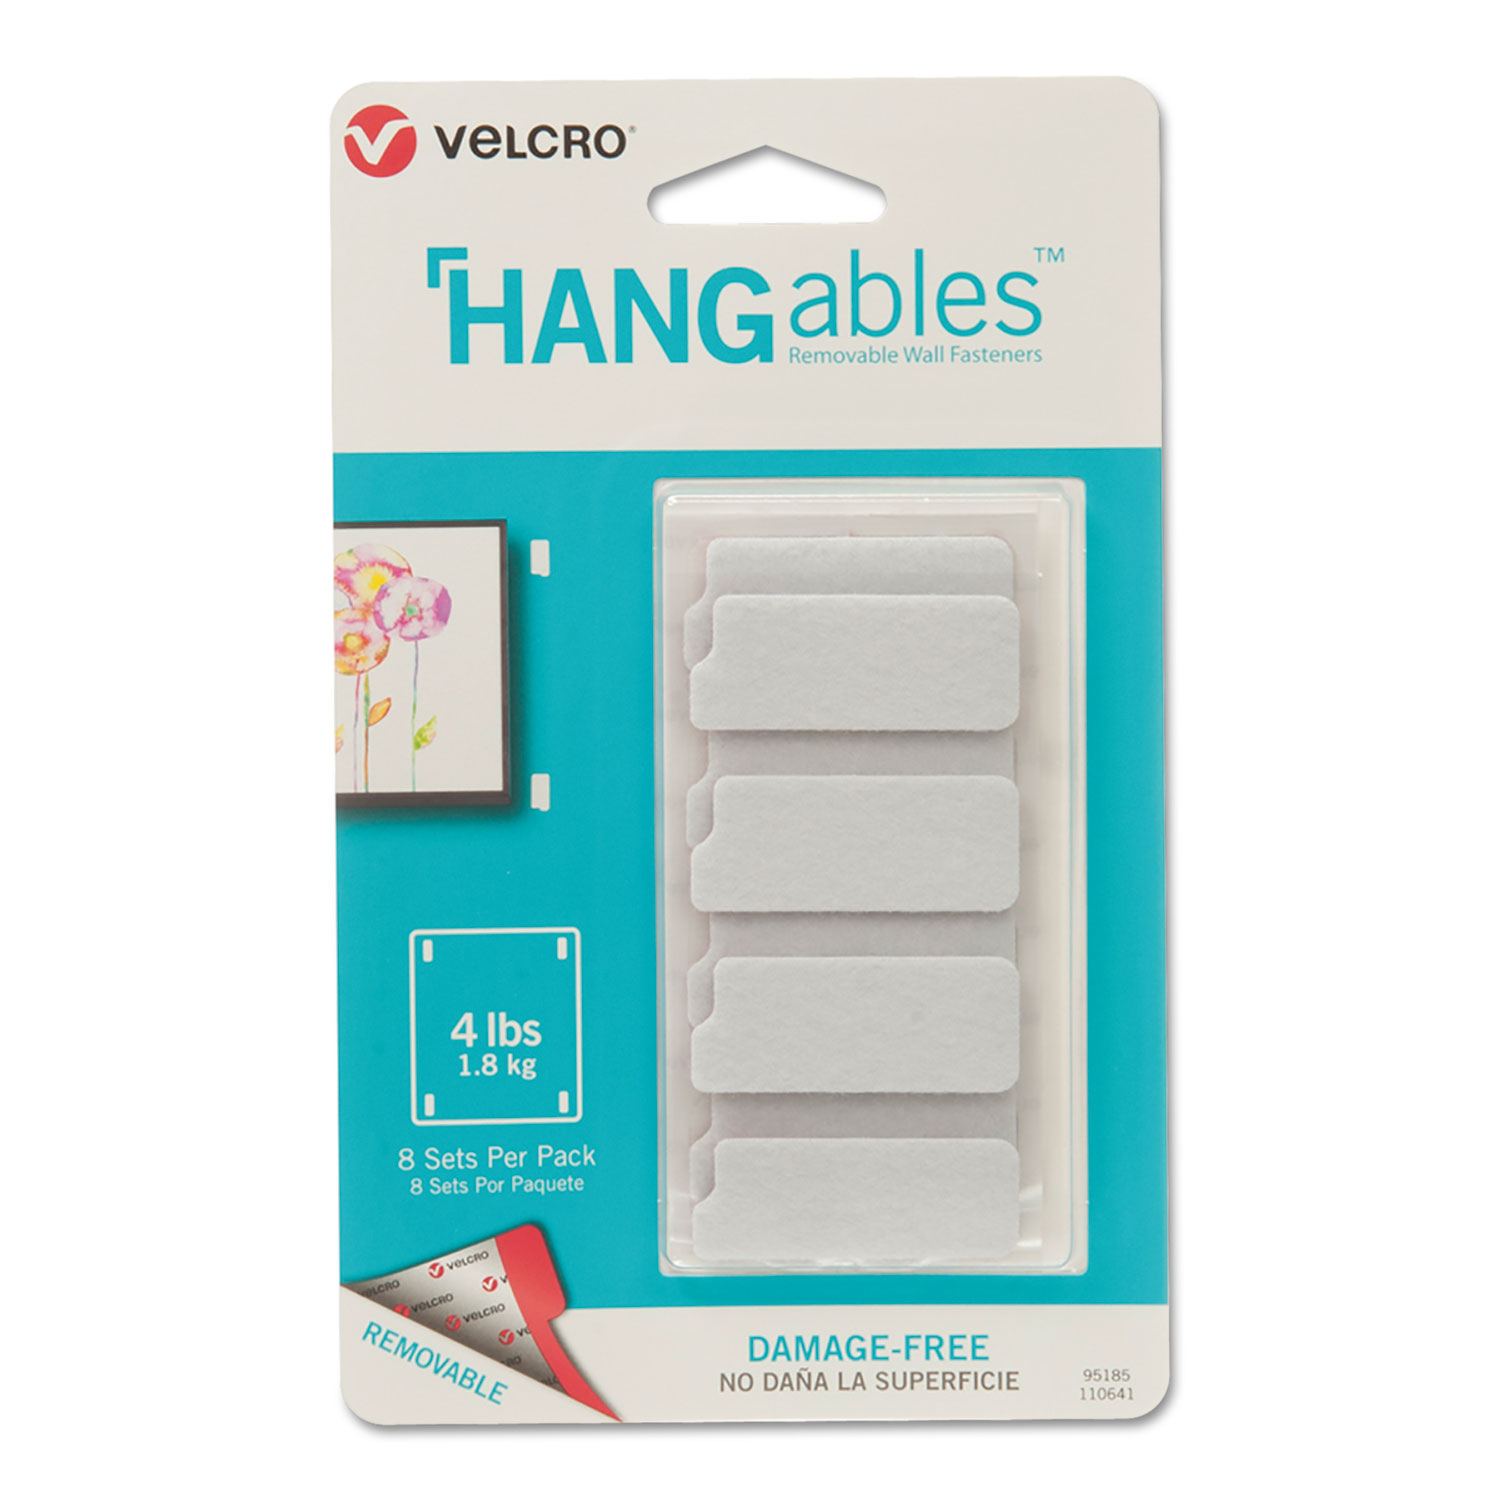 HANGables Removable Damage-Free Wall Fasteners, 3/4